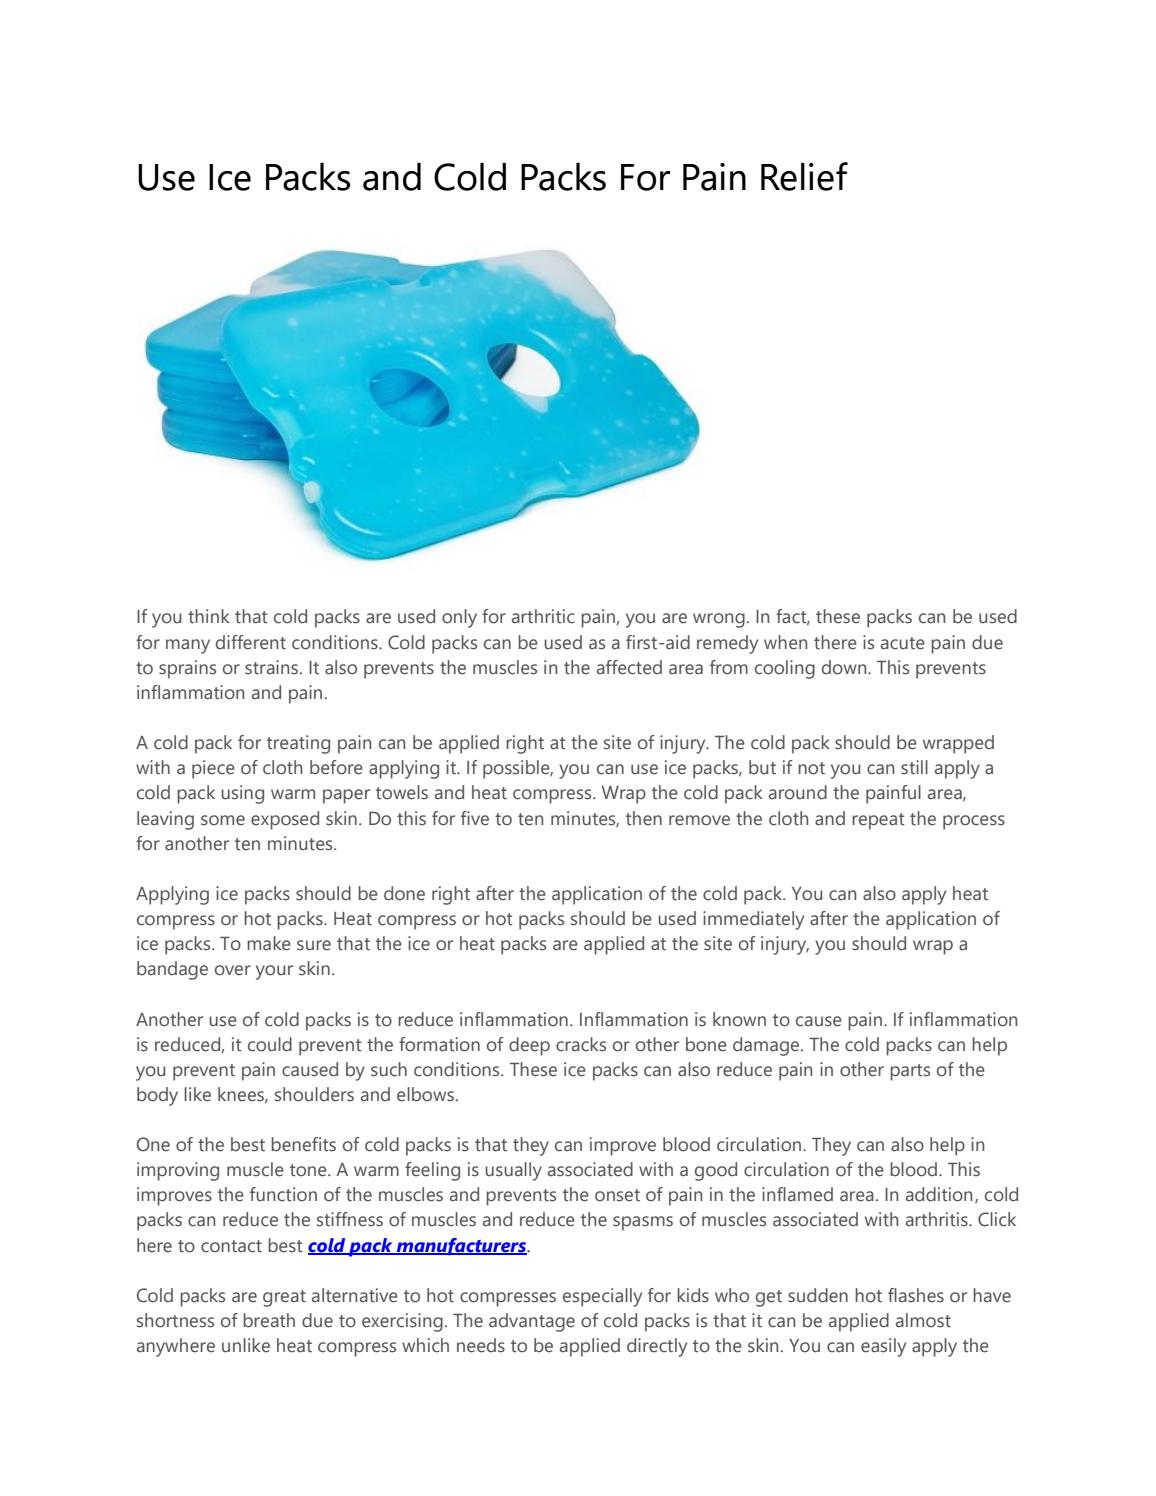 What are the benefits of using ice packs for pain relief?